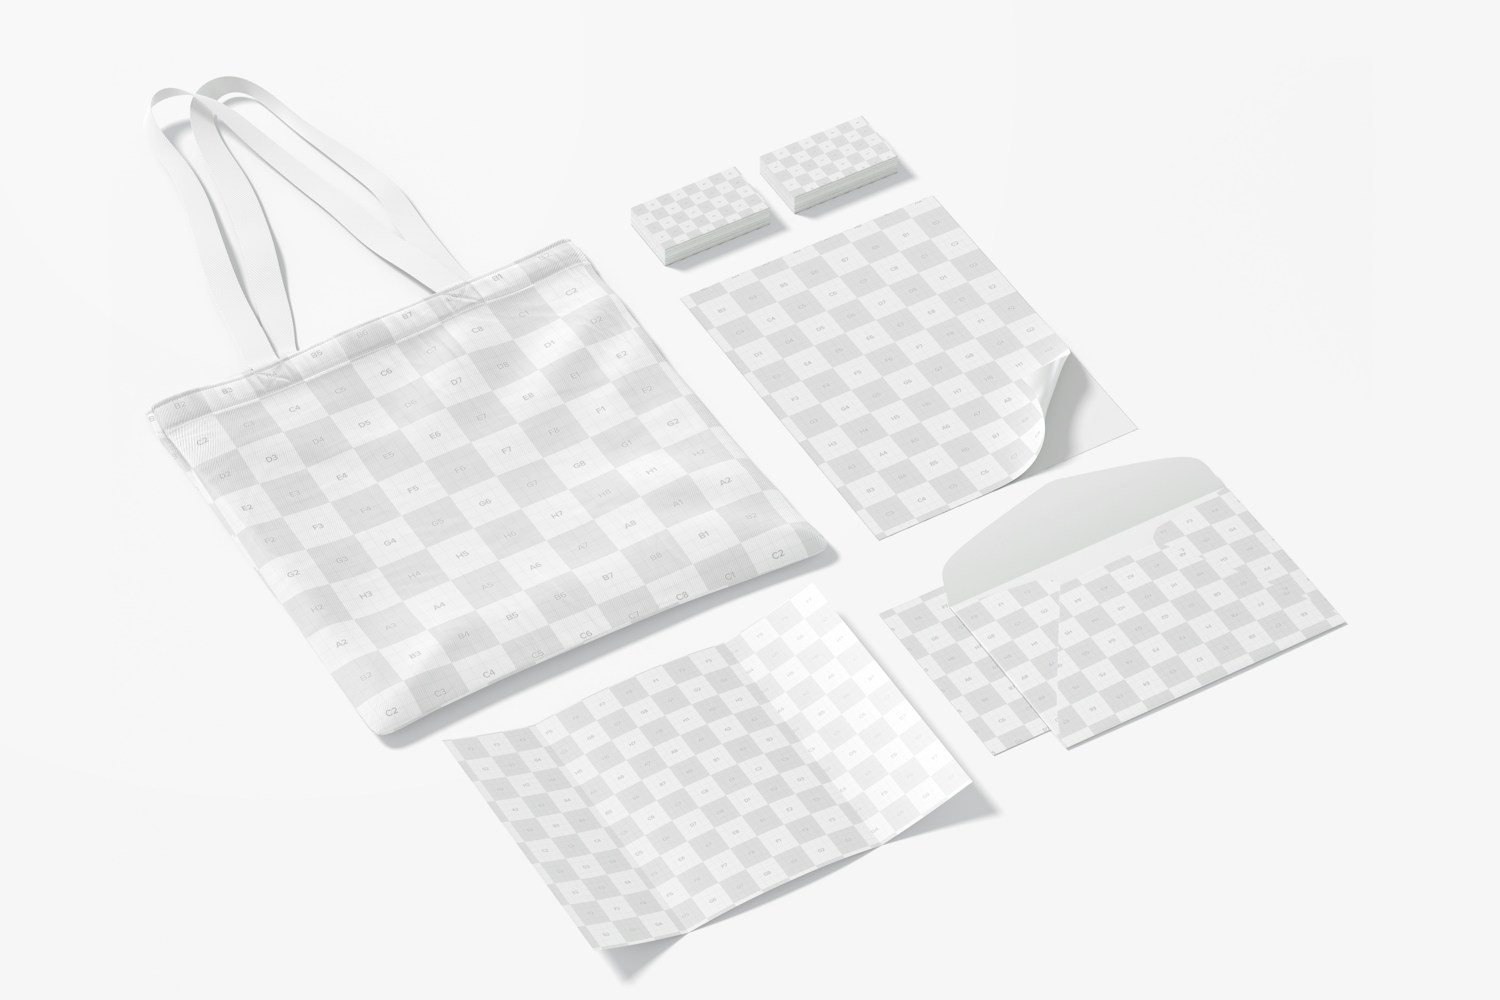 Stationery with Tote Bag Mockup 02